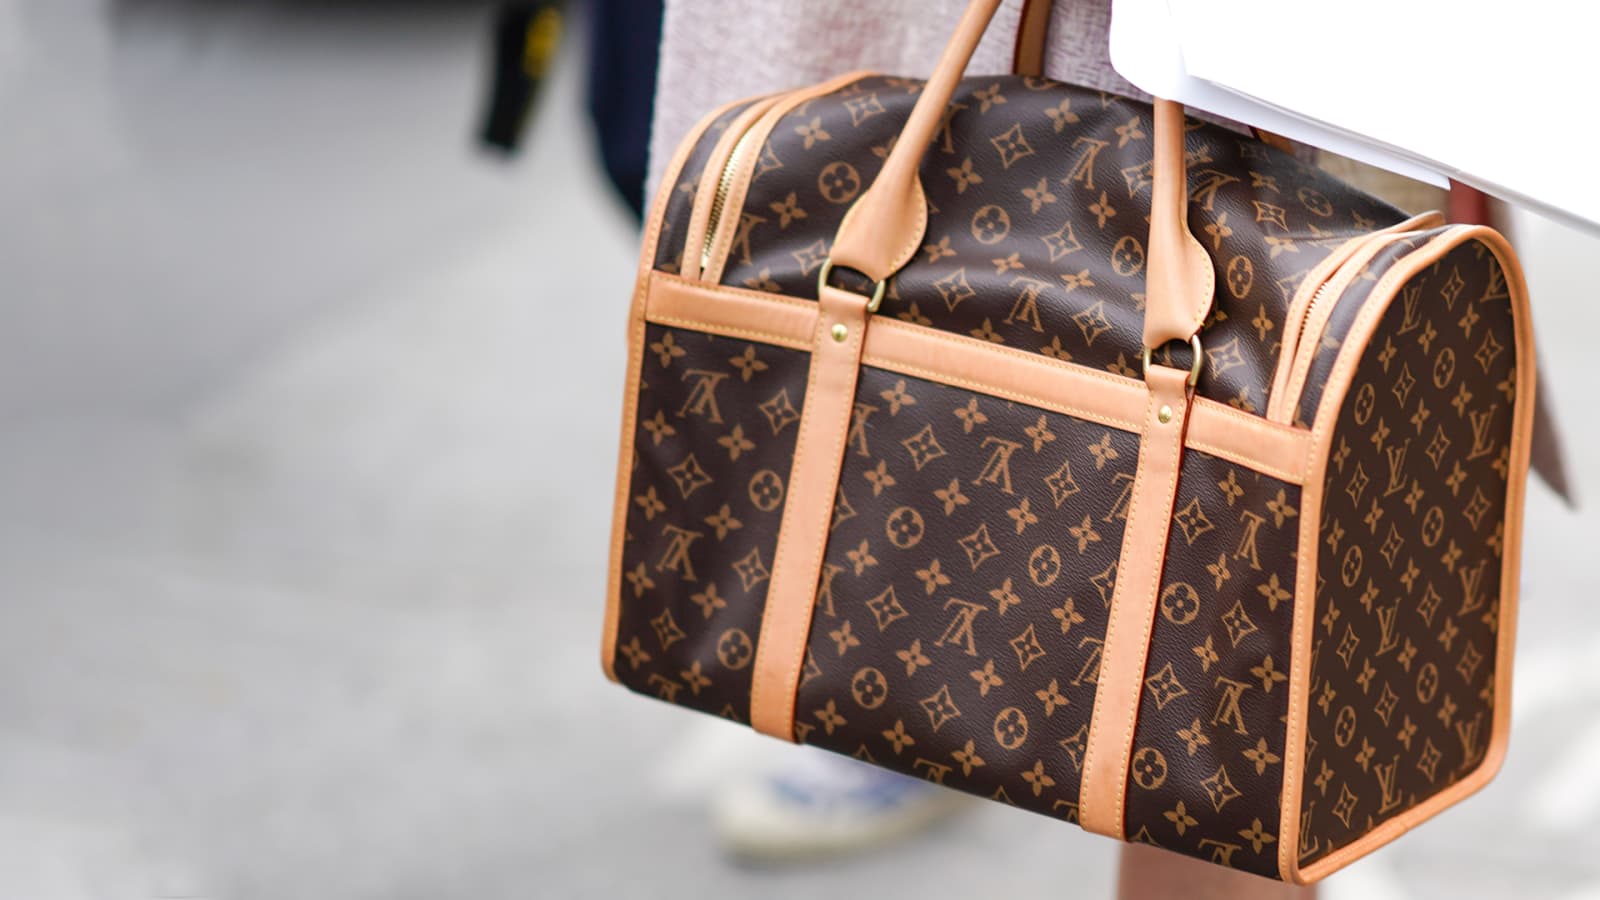 Kanye West x Louis Vuitton Collection - Price Confirmation 